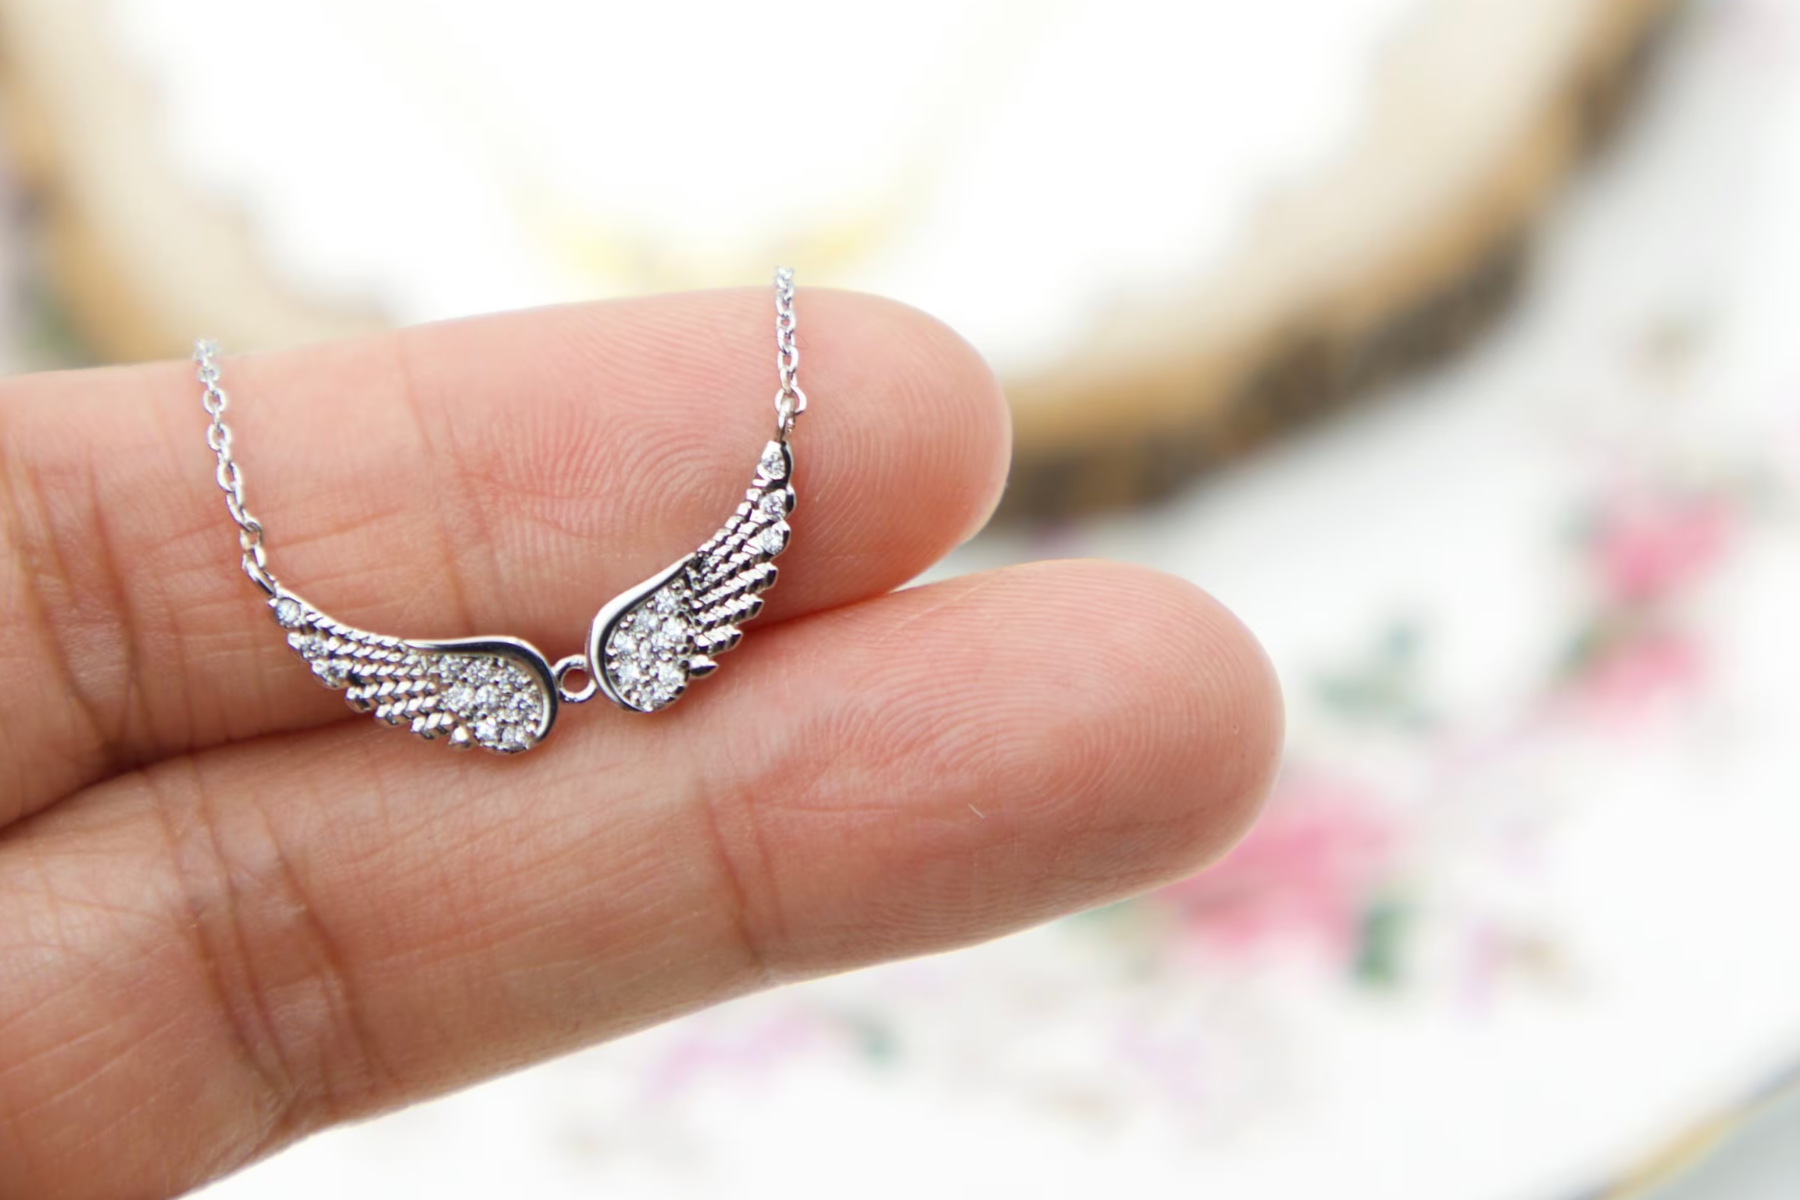 Angel Wing Necklaces For Women - A Symbol Of Hope And Protection For Women